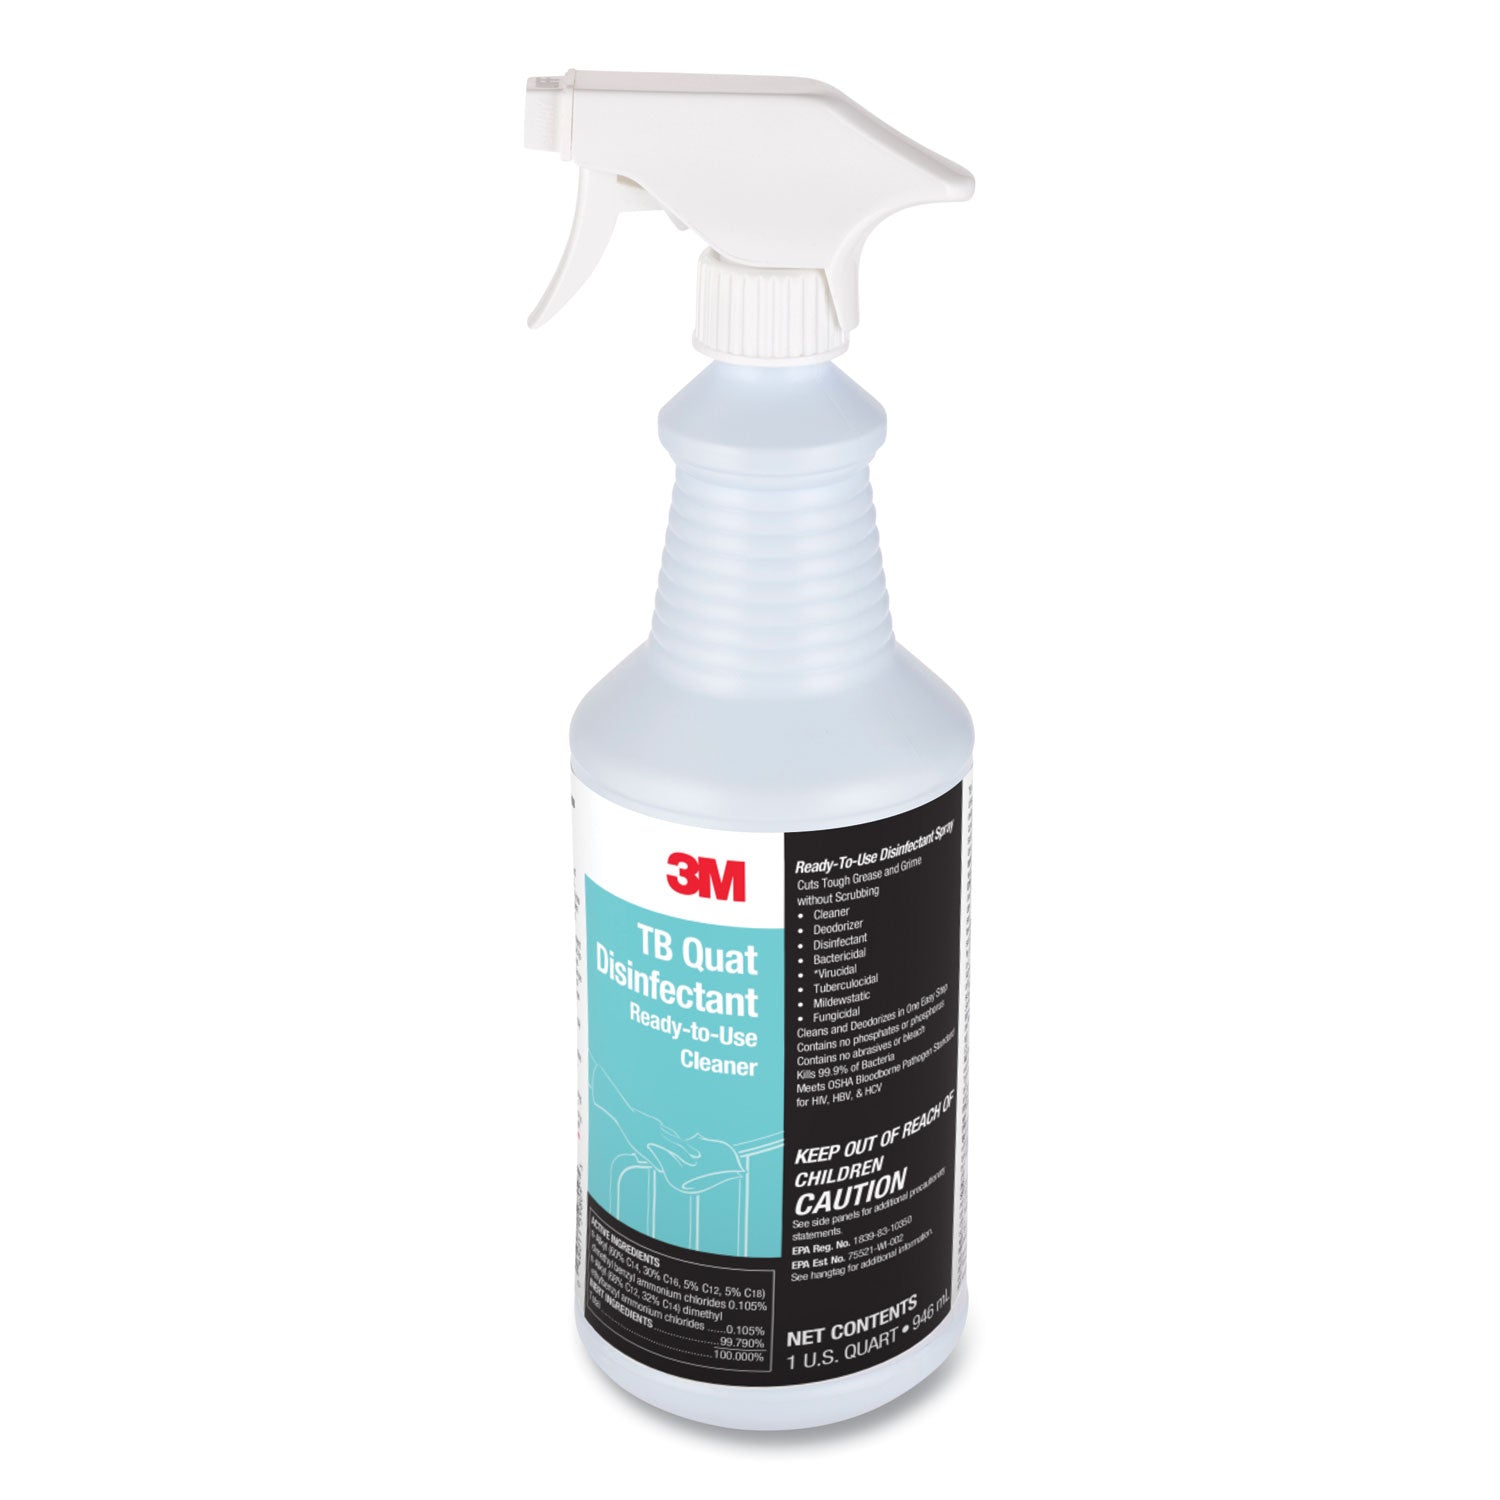 tb-quat-disinfectant-ready-to-use-cleaner-32-oz-bottle-12-bottles-and-2-spray-triggers-carton_mmm29612 - 1